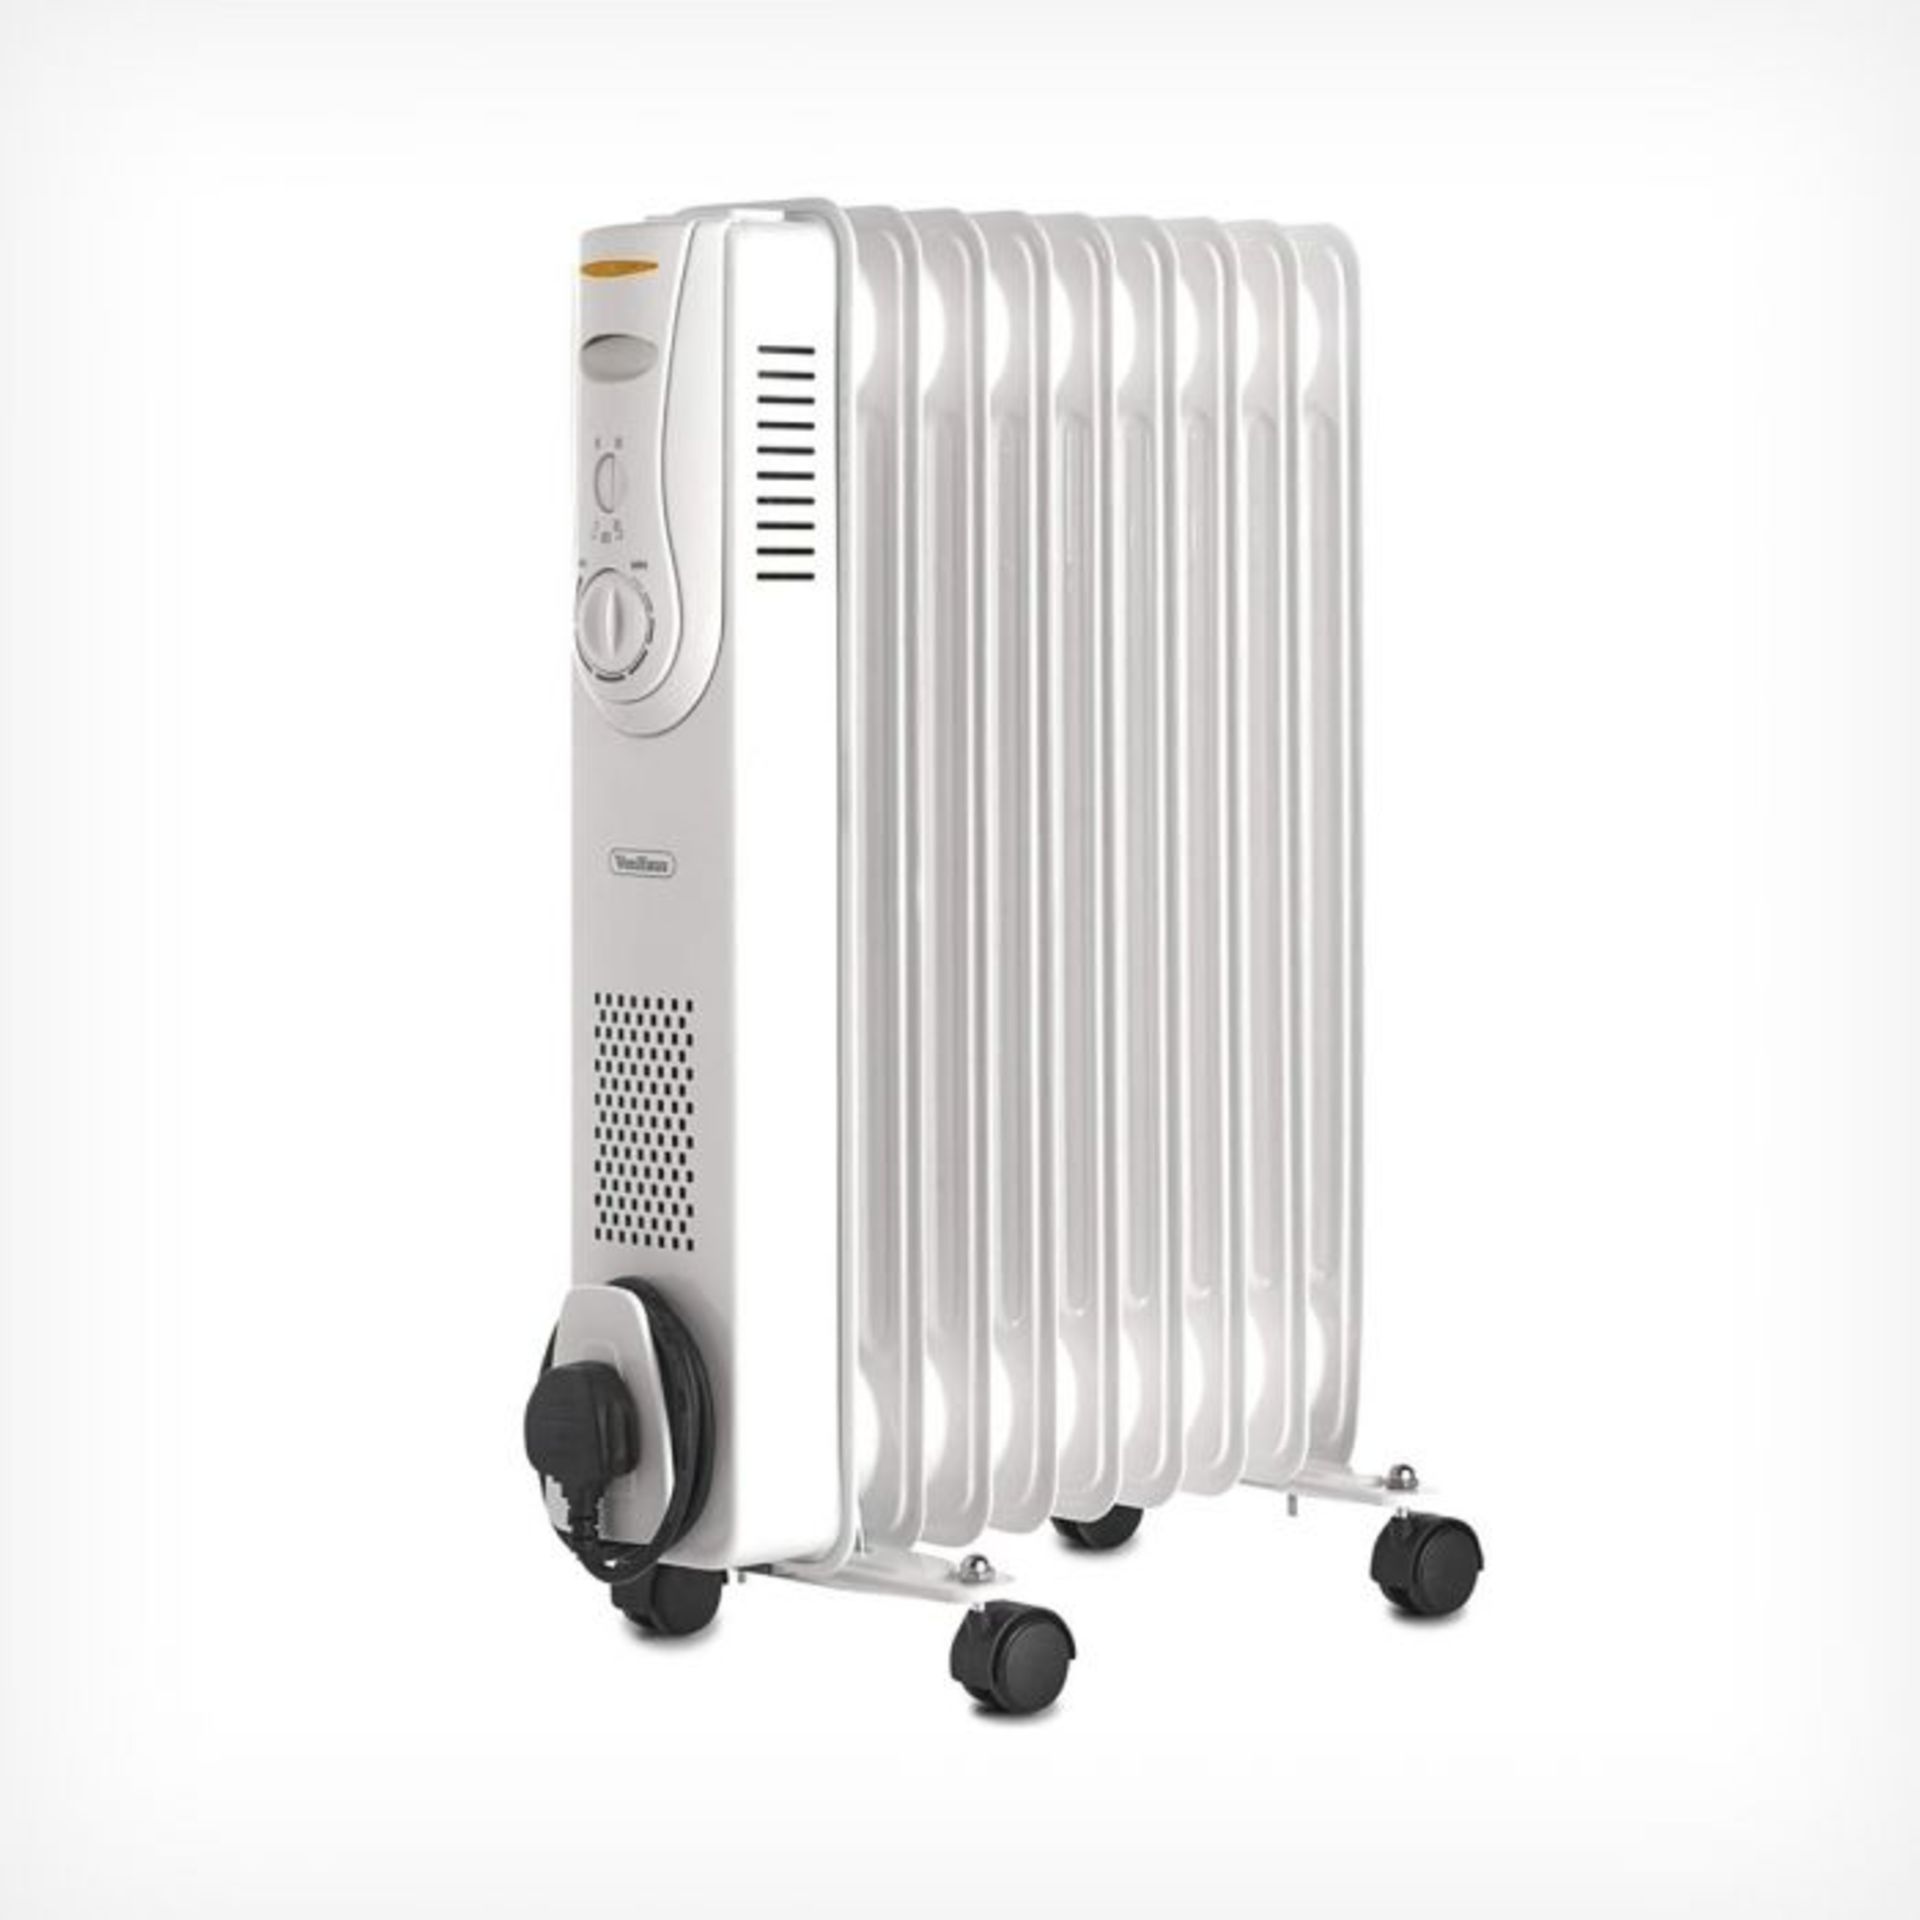 (V100) 9 Fin 2000W Oil Filled Radiator - White Powerful 2000W radiator with 9 oil-filled fins ... - Image 2 of 3